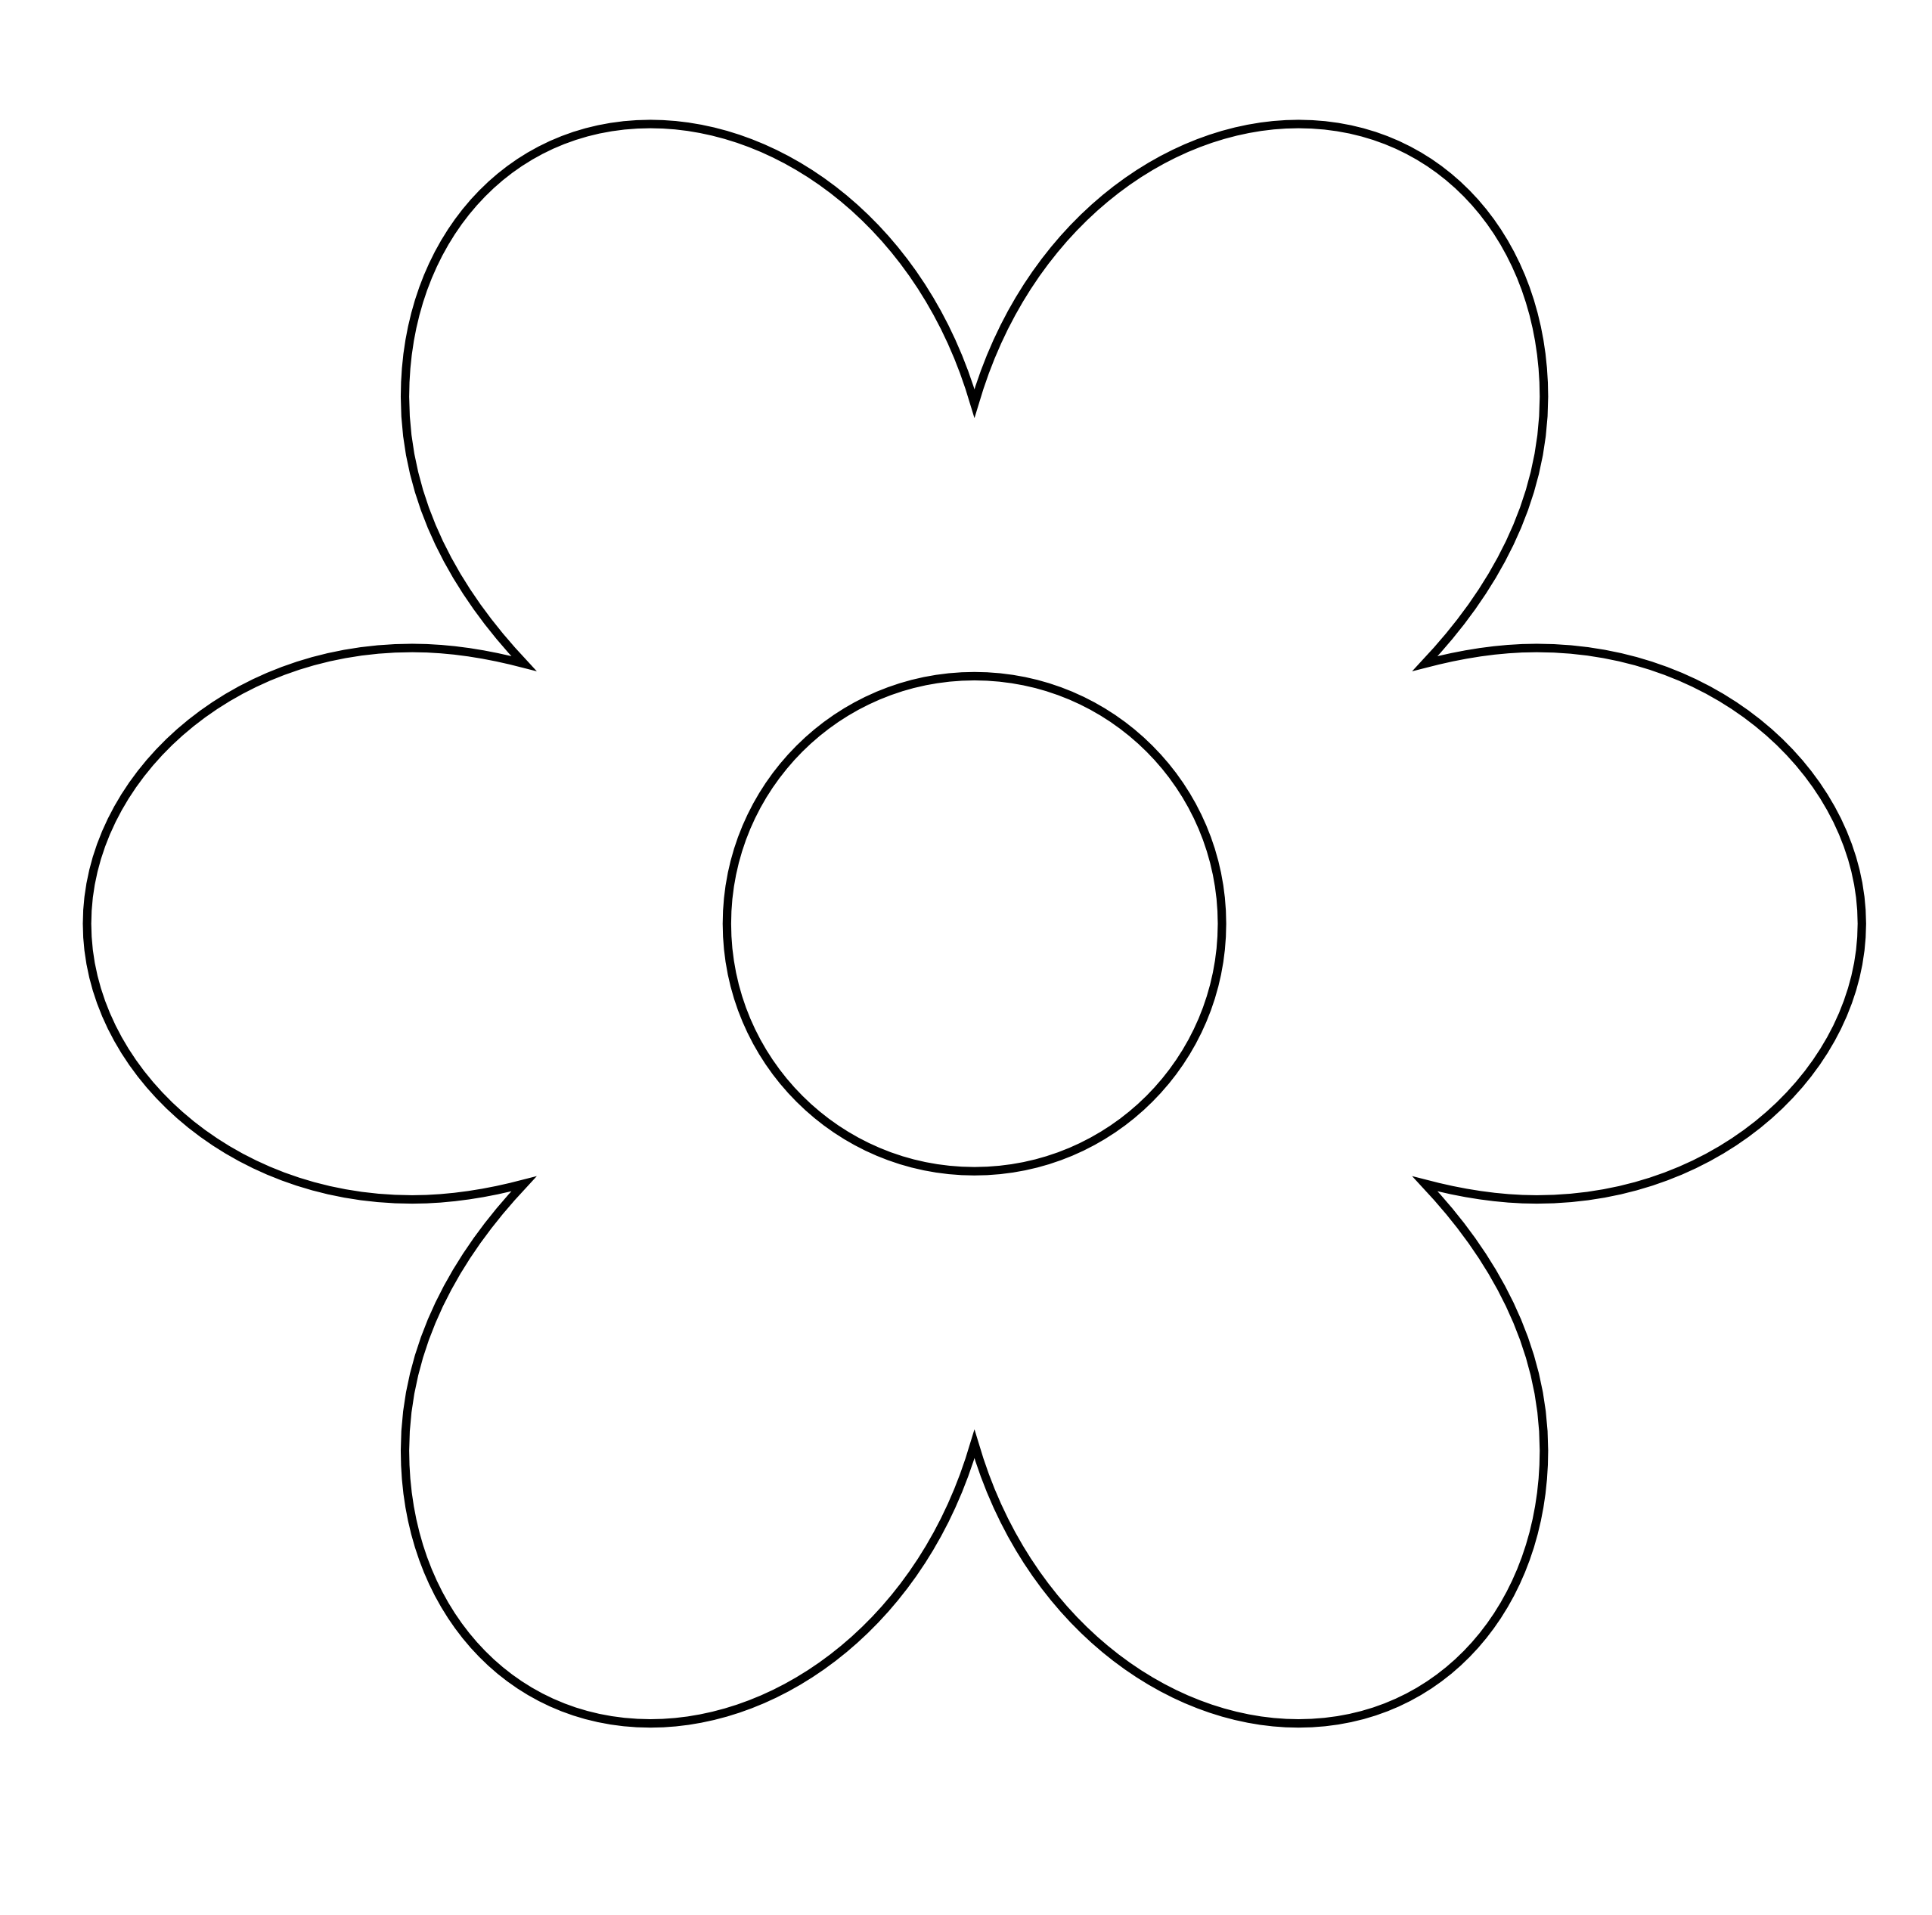 Black and White Flower Logo - Flower Black And White Transparent PNG Pictures - Free Icons and PNG ...